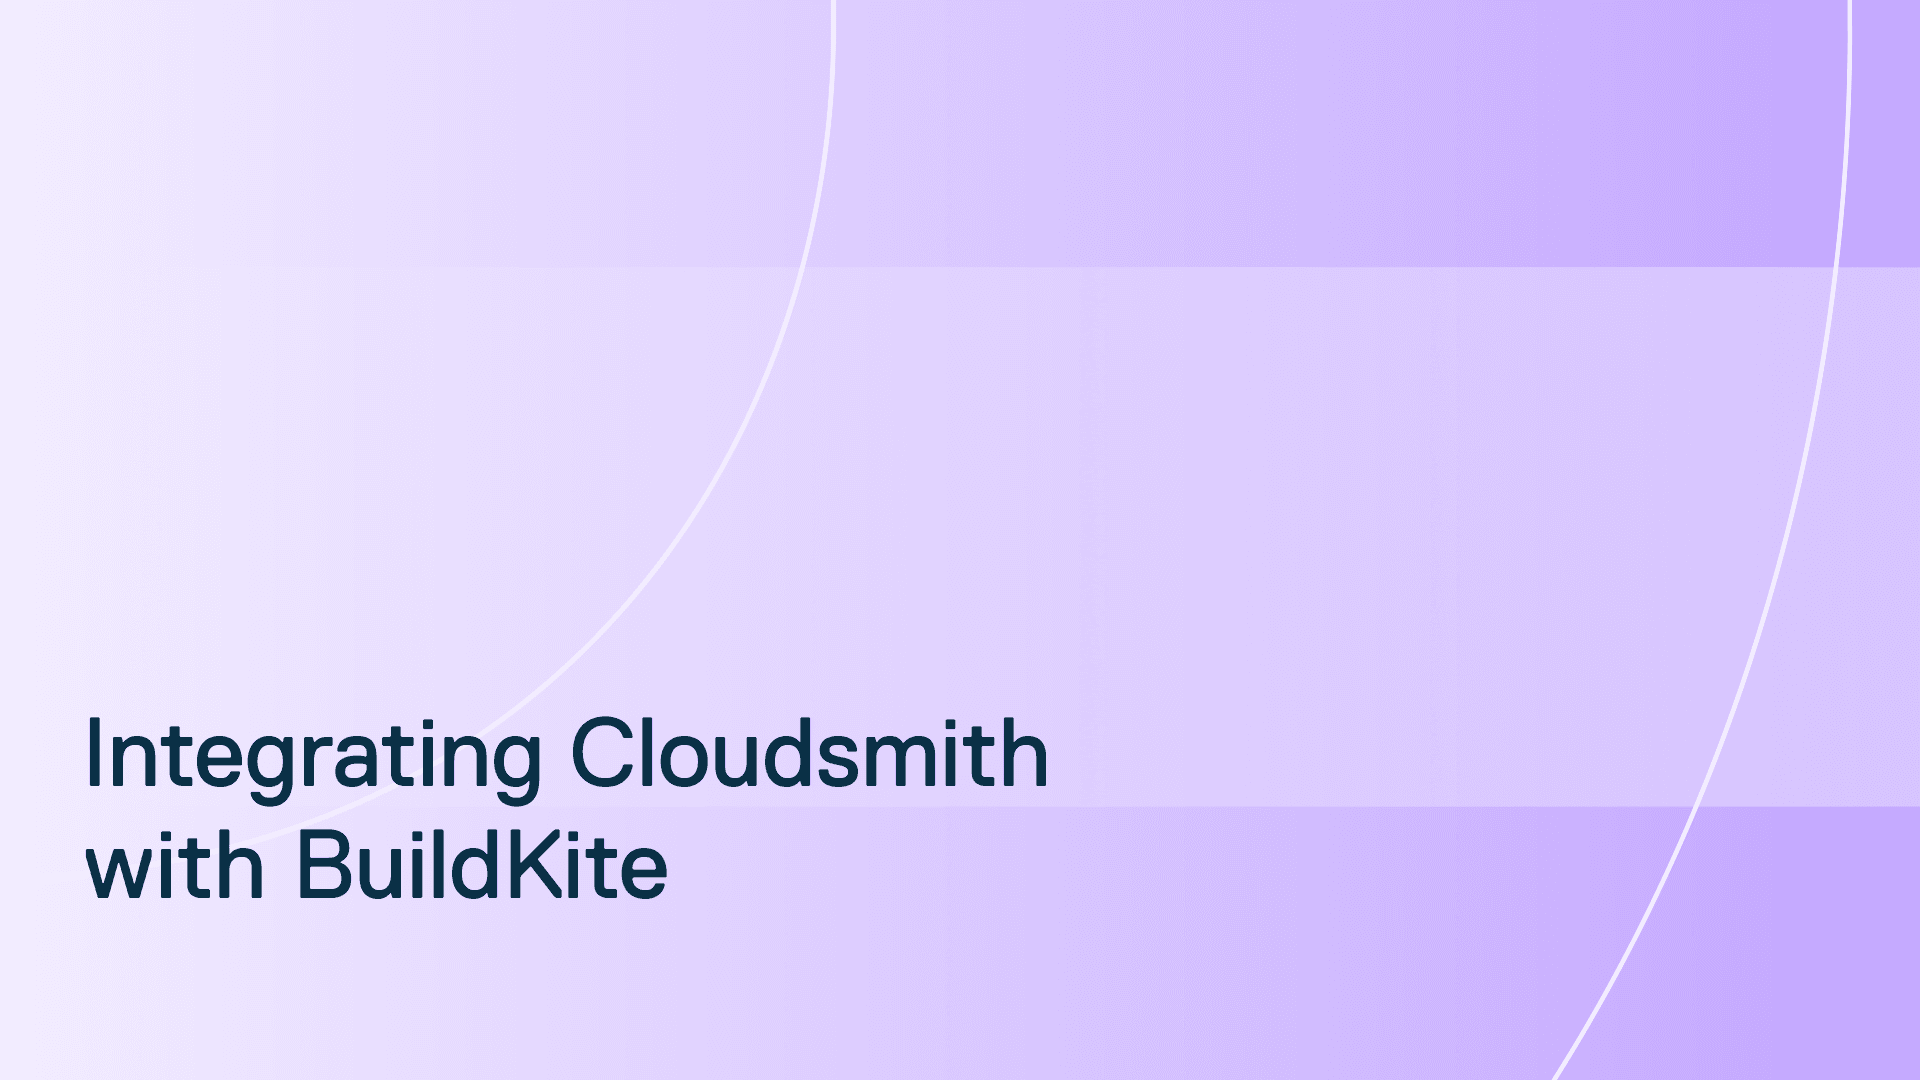 Using Buildkite to push packages to Cloudsmith